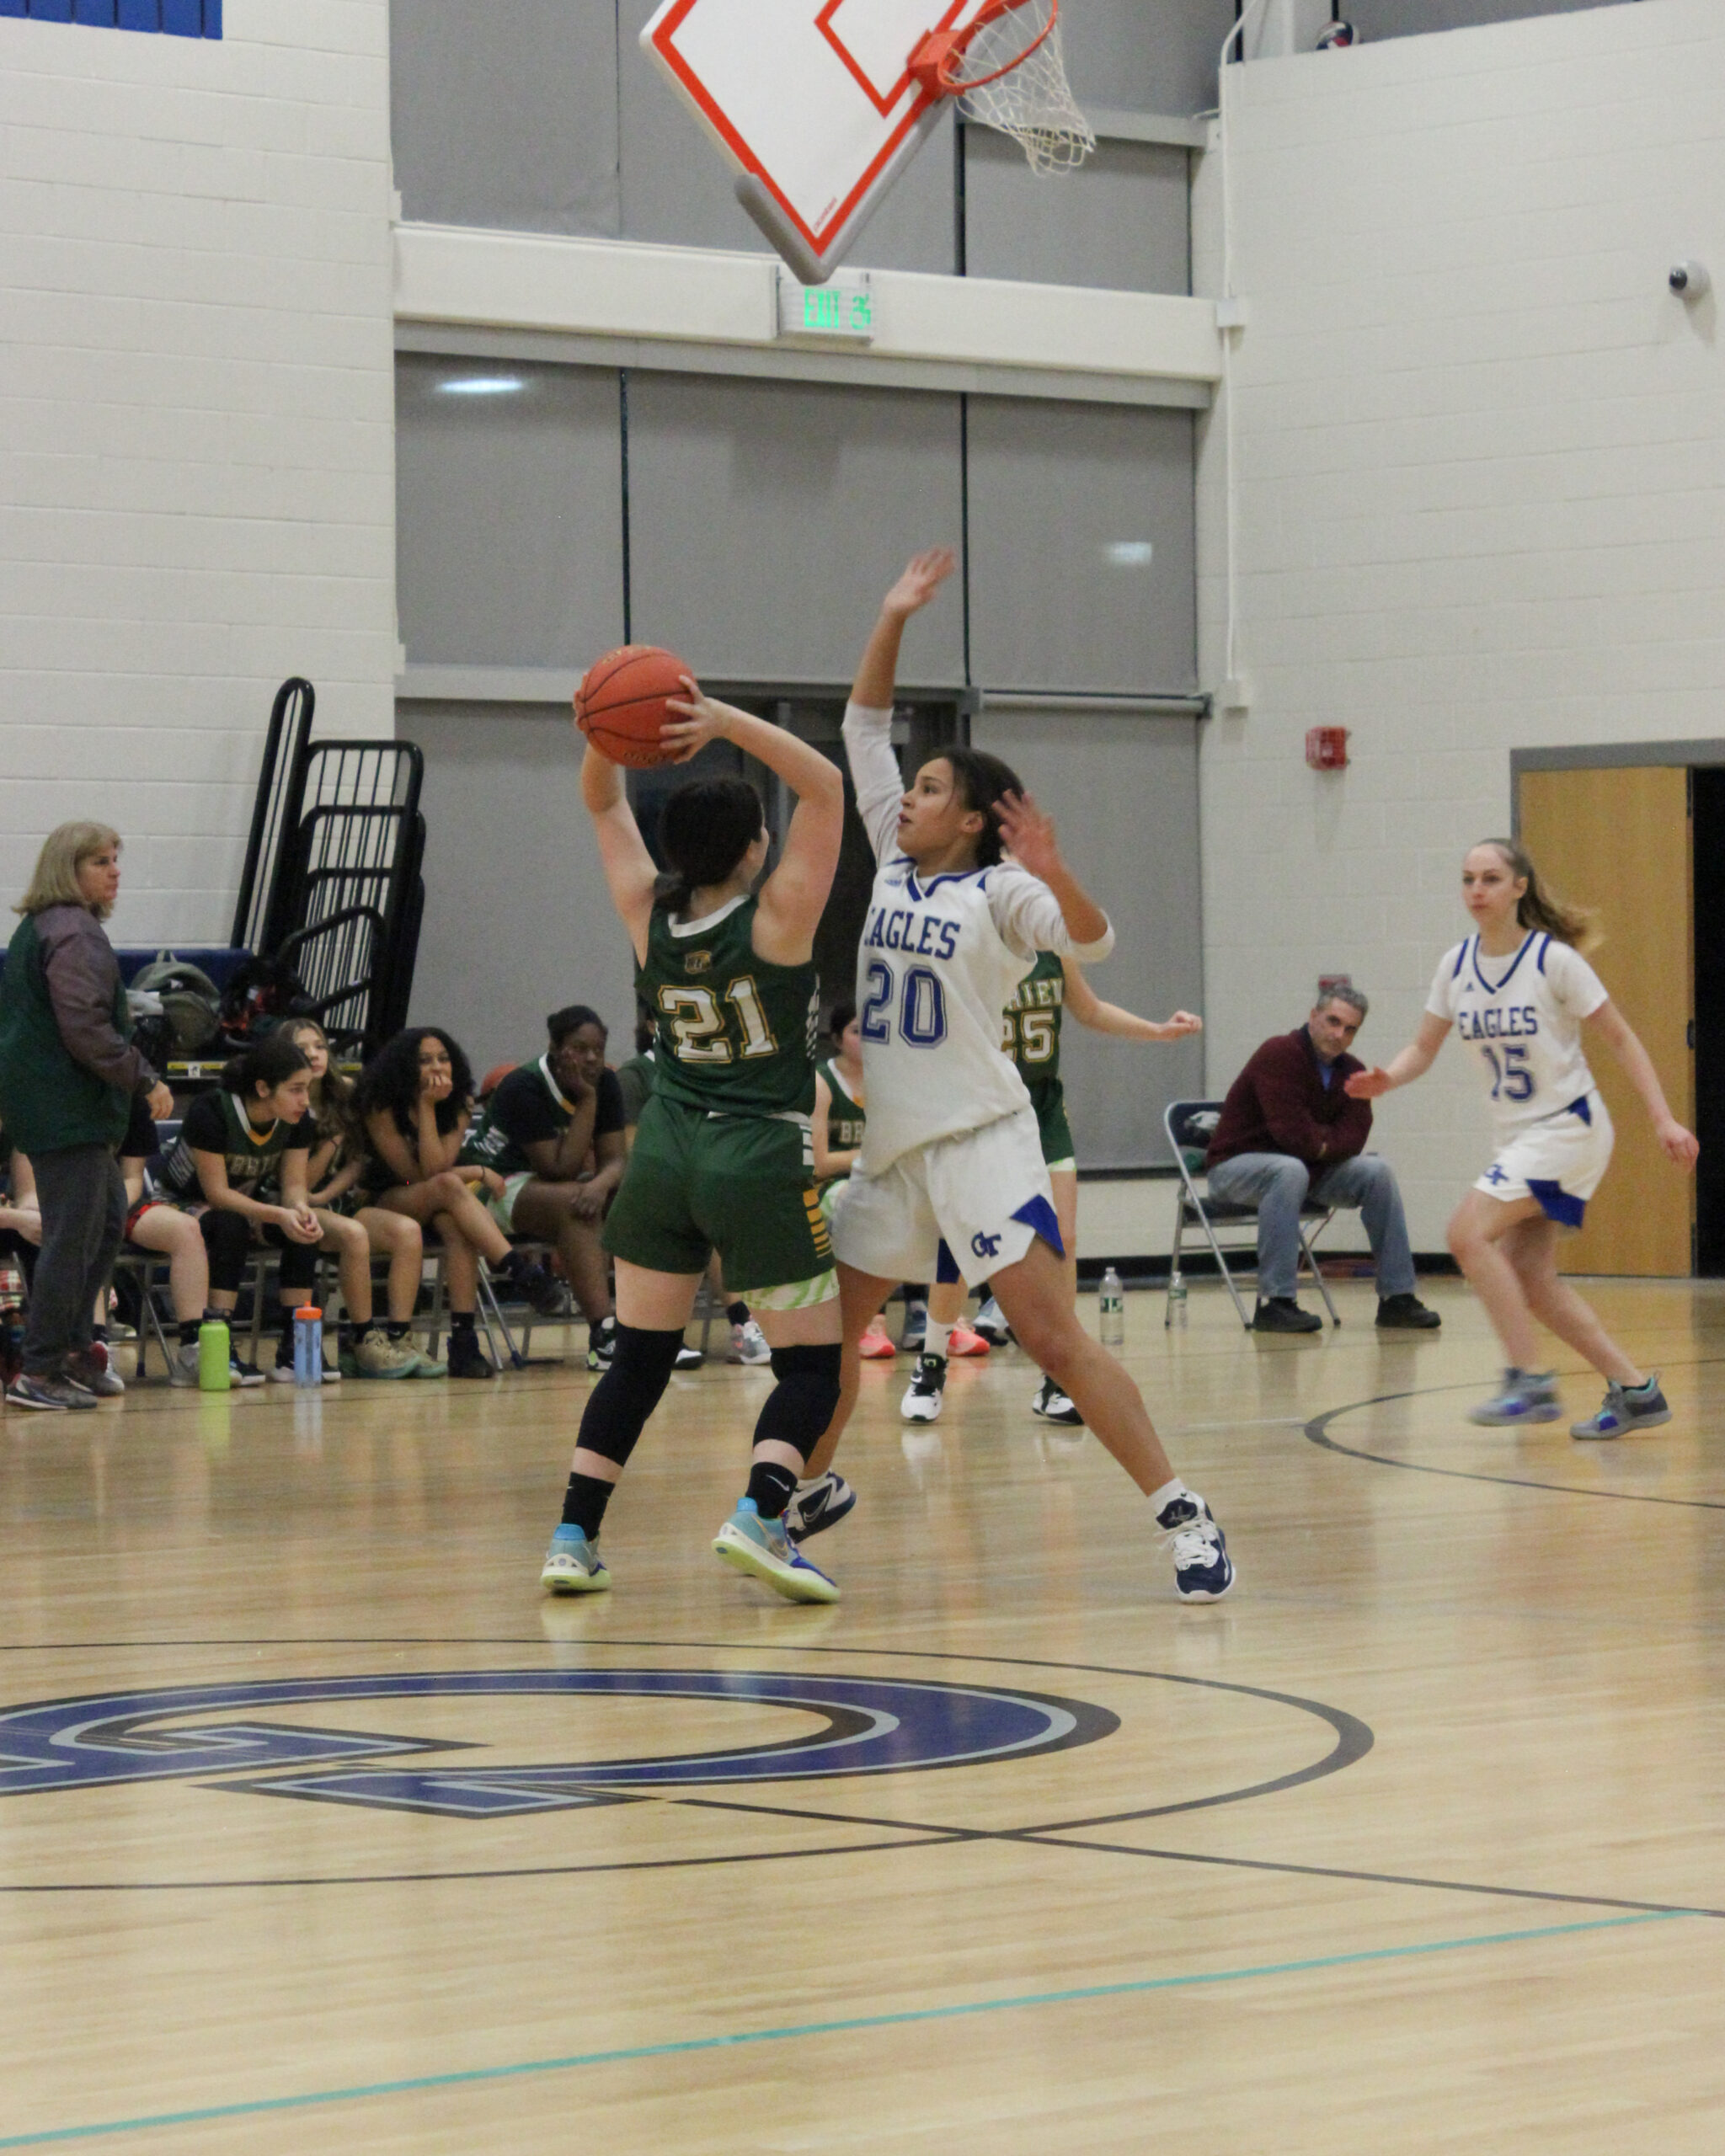 Action shot of a player playing defense in a Grasso Tech Girls' Basketball game.